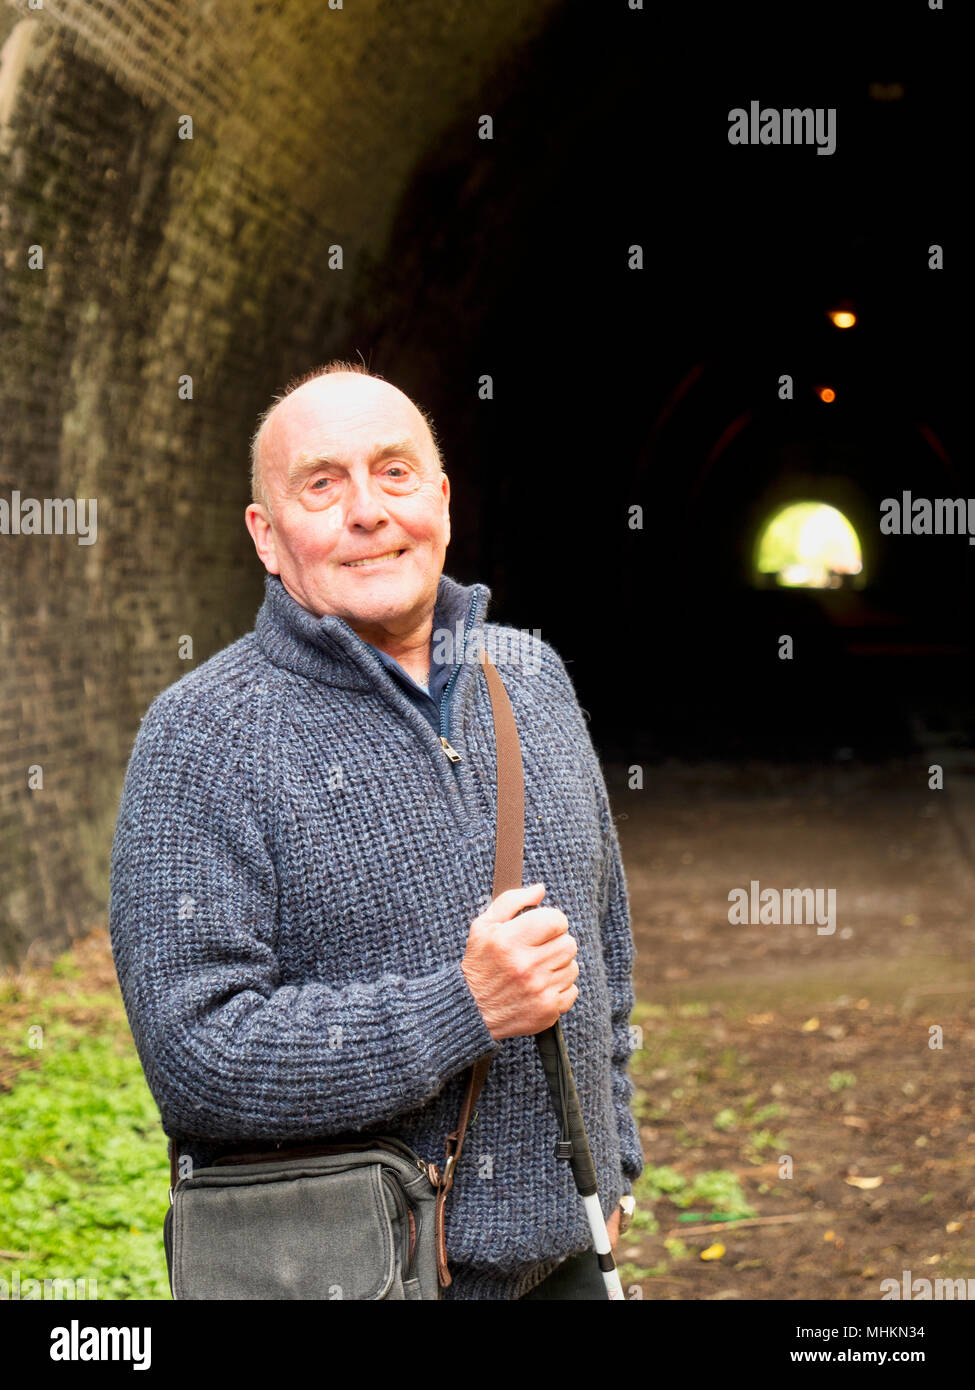 Ashbourne, UK. 2nd May, 2018. Blind British Armed Forces veteran Simon Mahoney at the entrance to Tissington Tunnel, Ashbourne, ahead of his book launch "Descent into Darkness" which he wrote as an insight to the thousands who have & are losing their sight, their carers and professionals working in the eye care field. Credit: Doug Blane/Alamy Live News Stock Photo